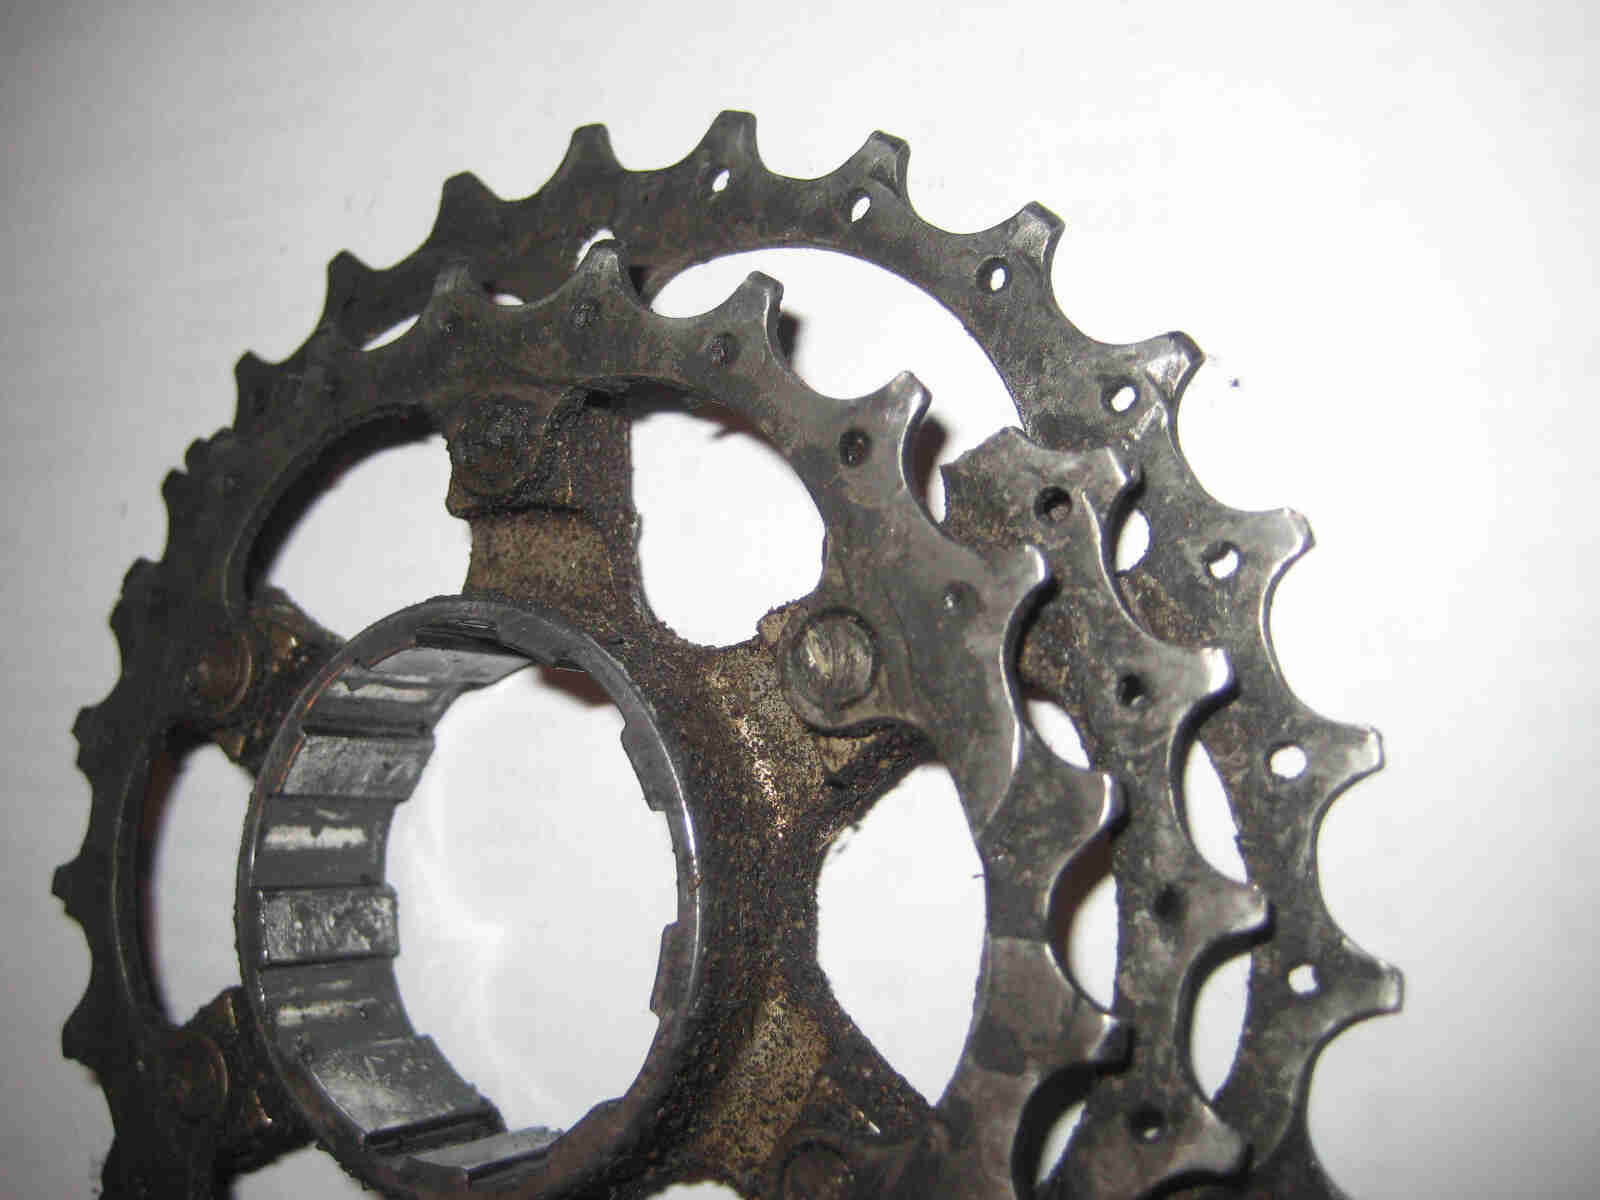 Flat, right side view of a bike chainring assembly, against a white background